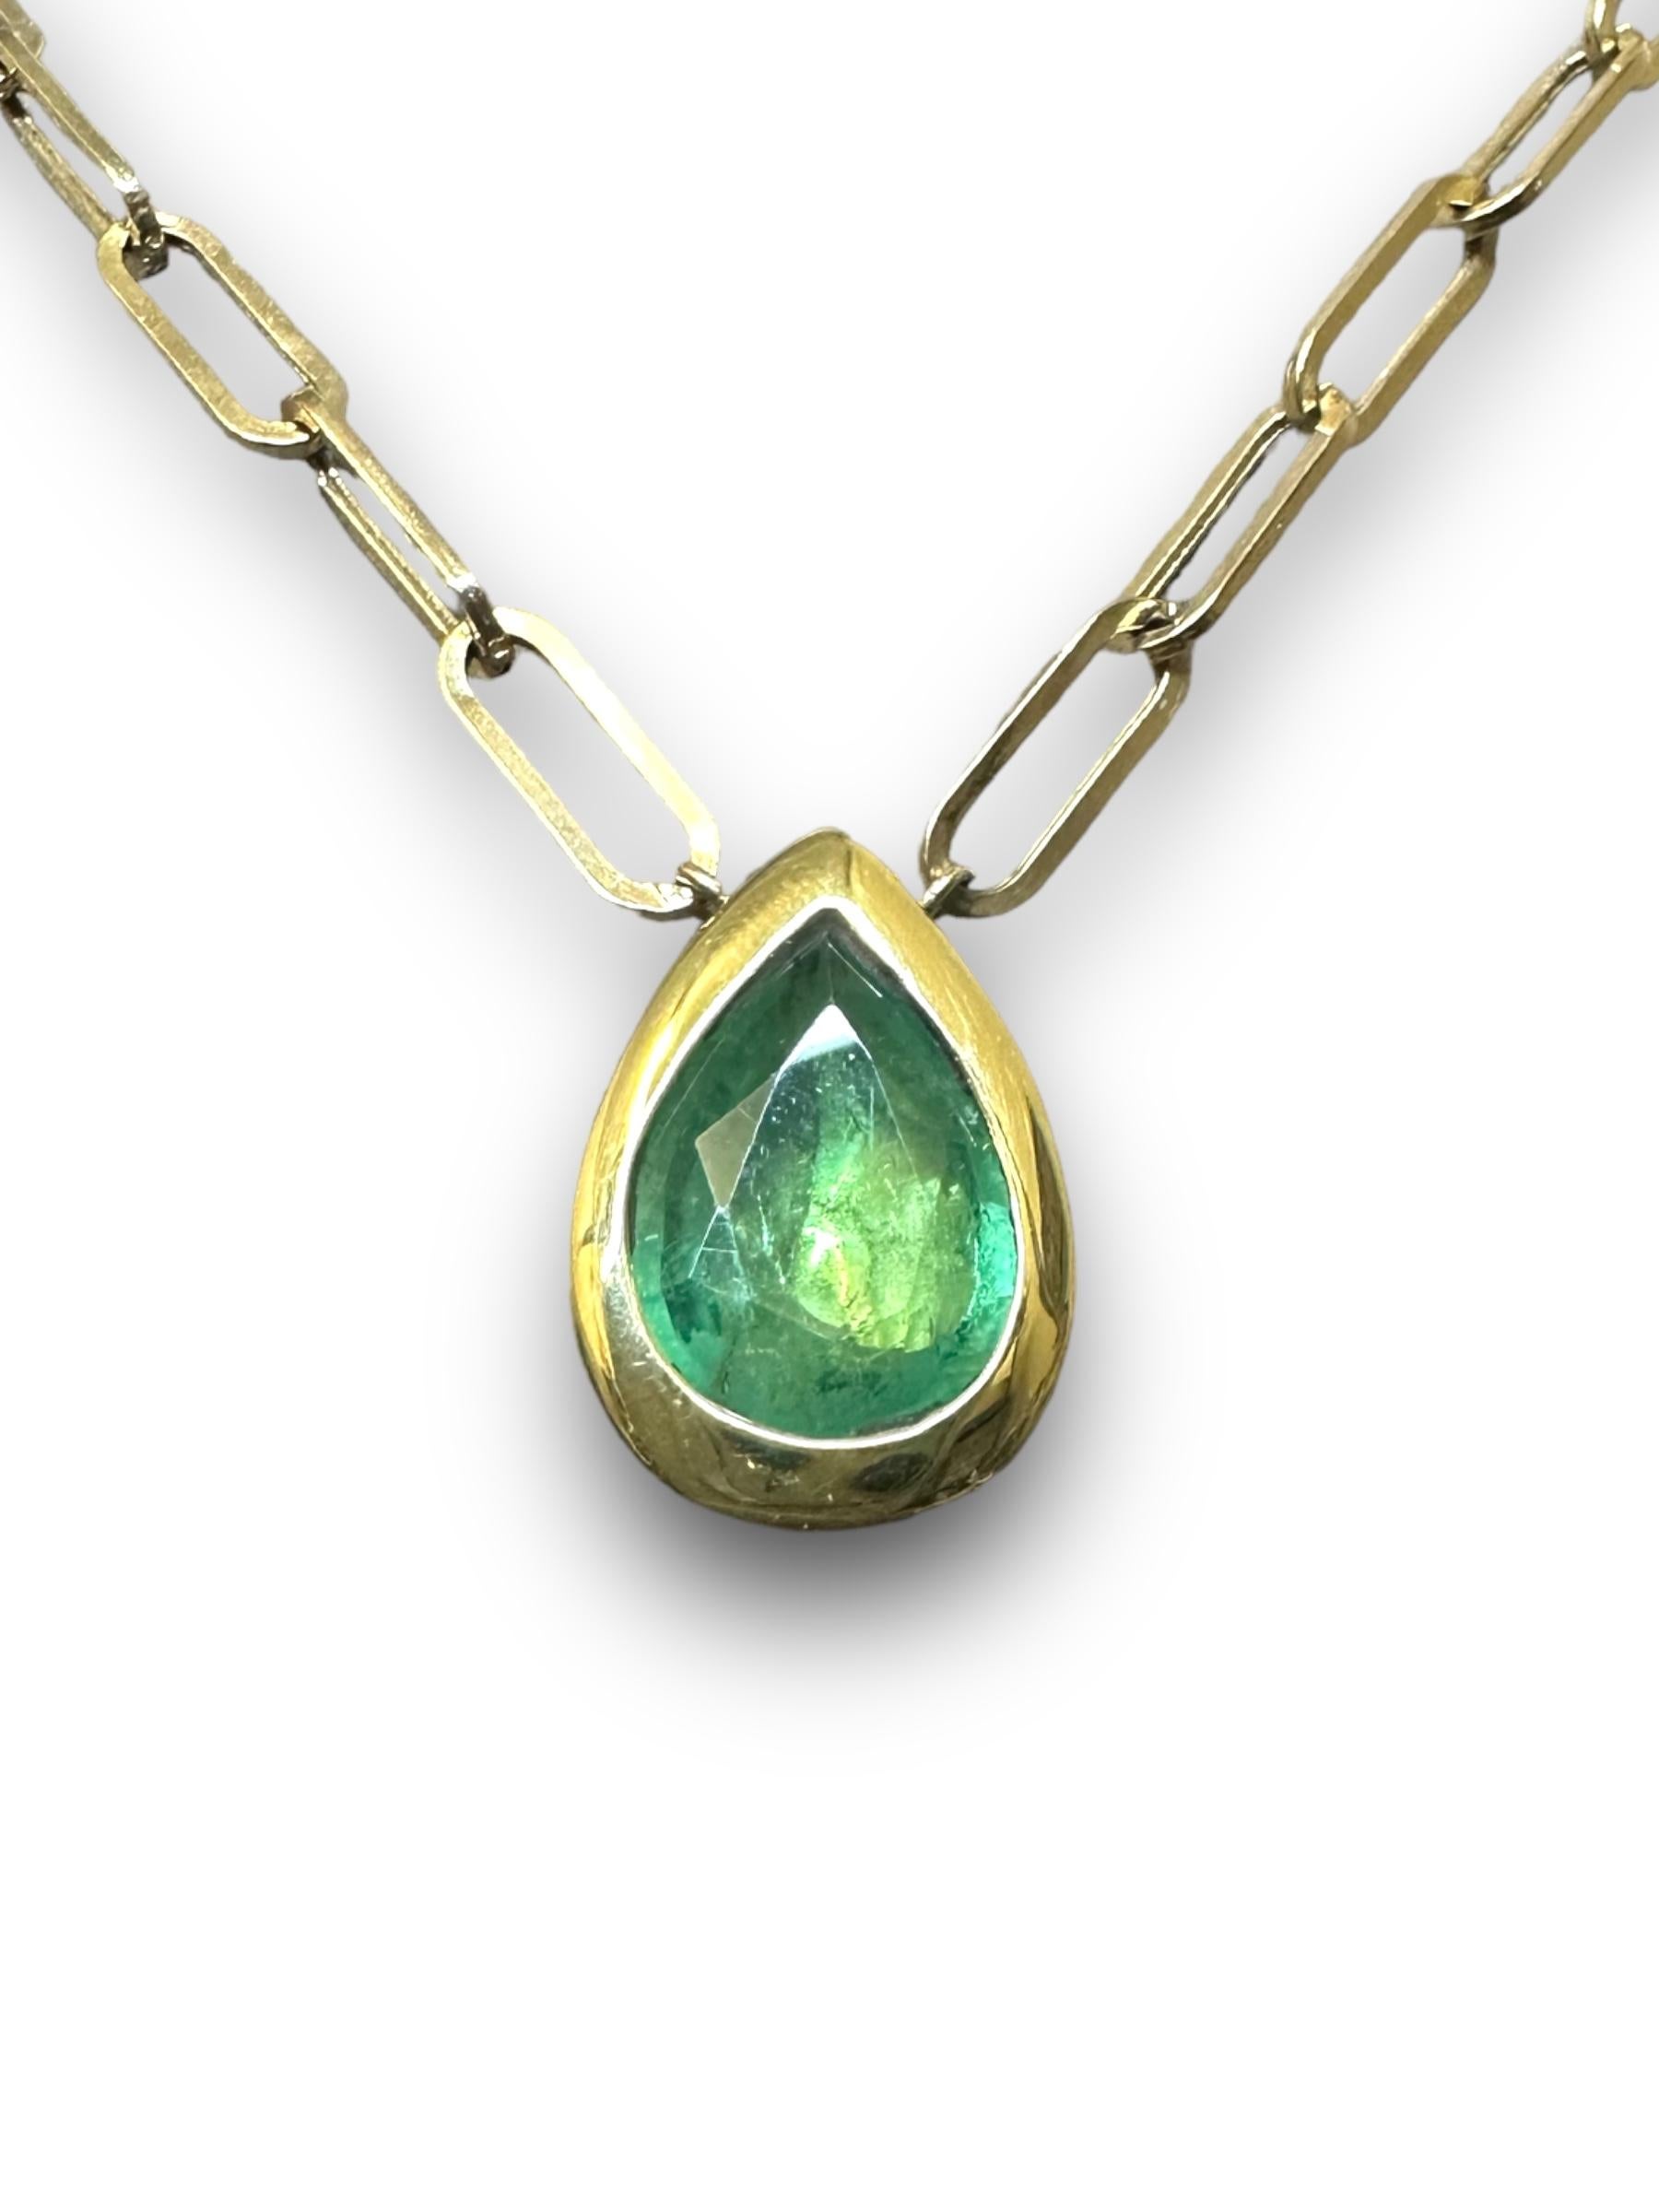 Introducing a modern, timeless one of a kind emerald drop necklace of 2.7 cts that is sure to turn heads wherever you go. Whether you wear it for its beauty or for its energy, an emerald necklace is a meaningful addition to any jewelry